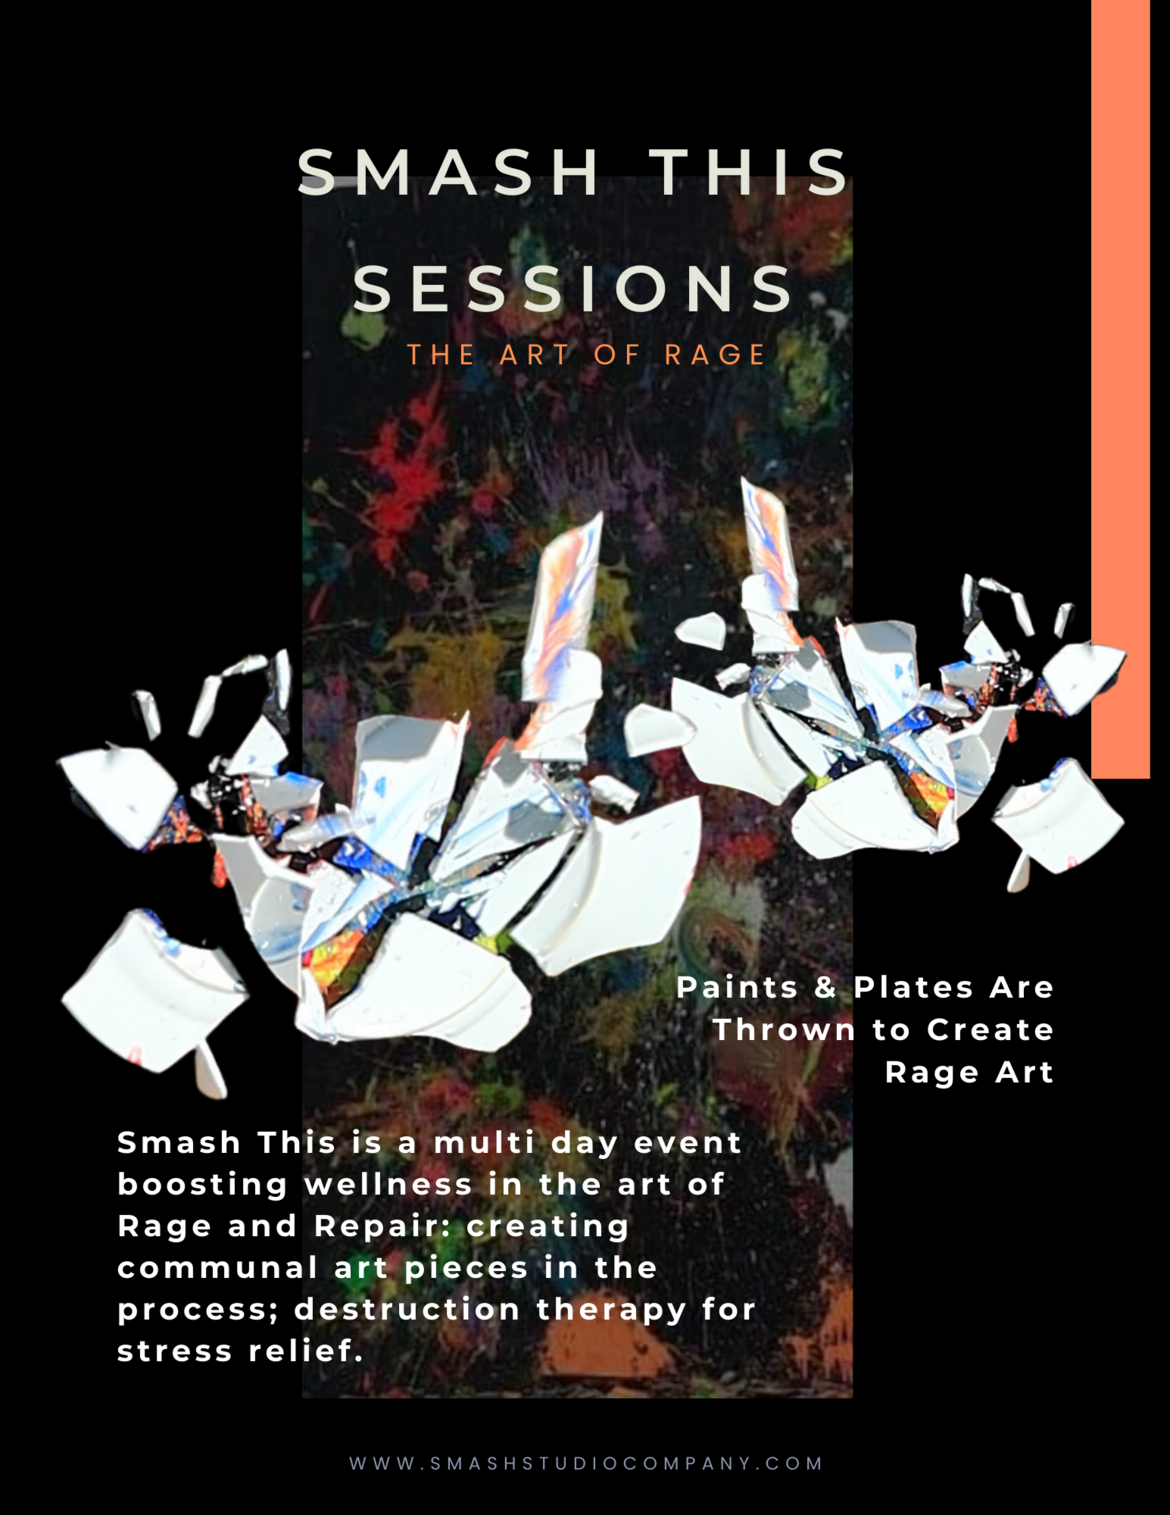 Smash This Session Promo Poster highlighting the art of rage product and services